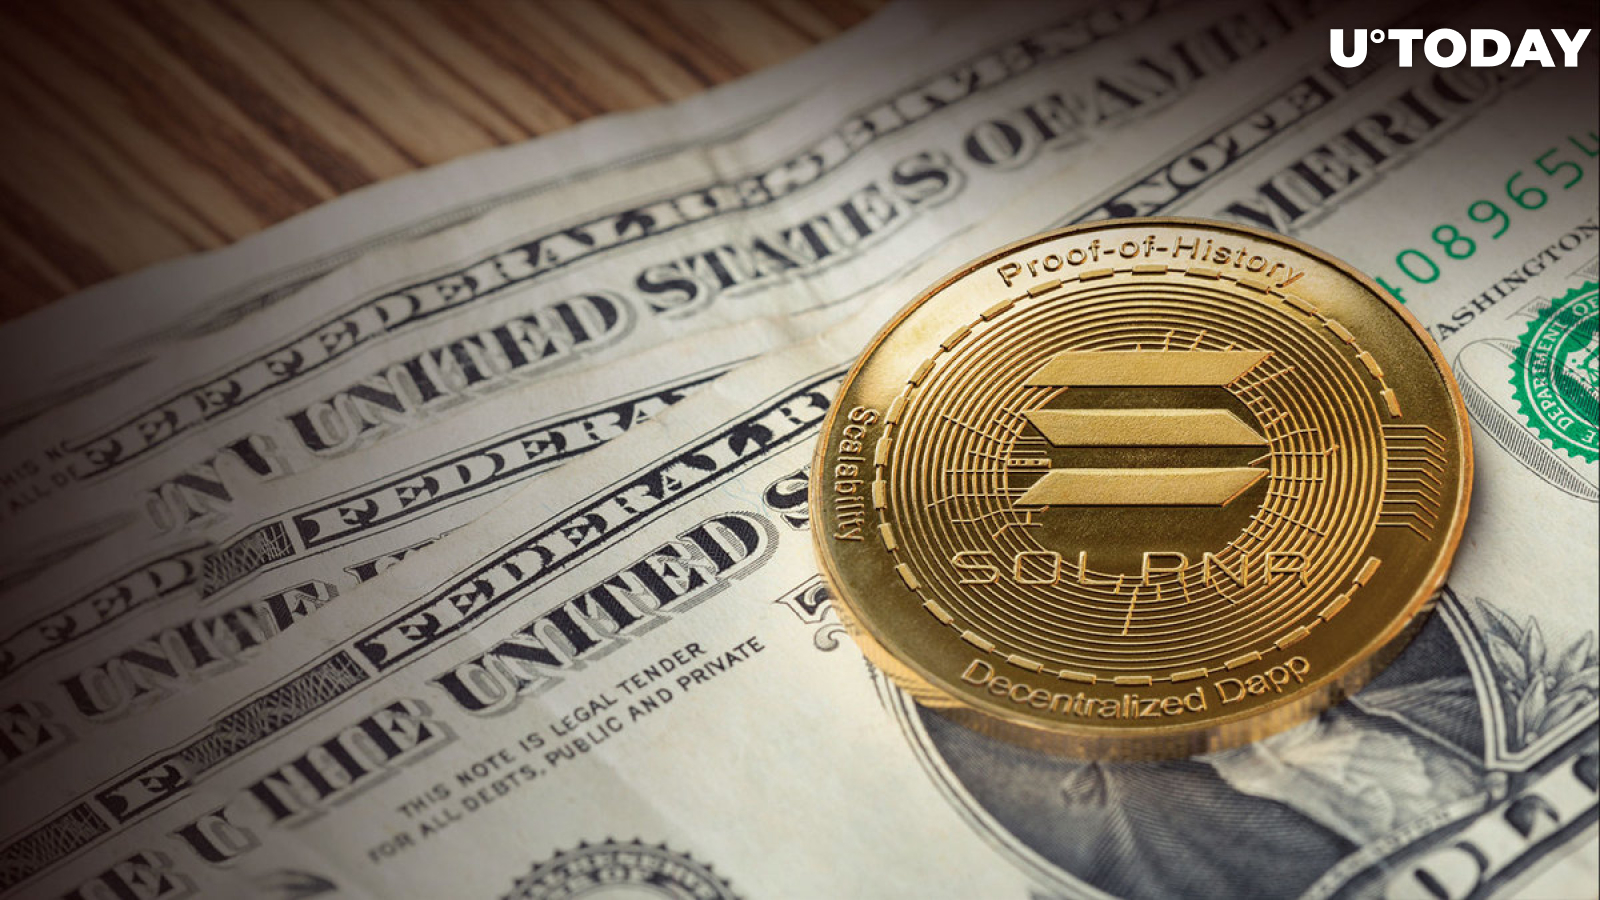 Solana (SOL) at $61 Is Perfect Steal, 3 Reasons SOL Is Billed for More